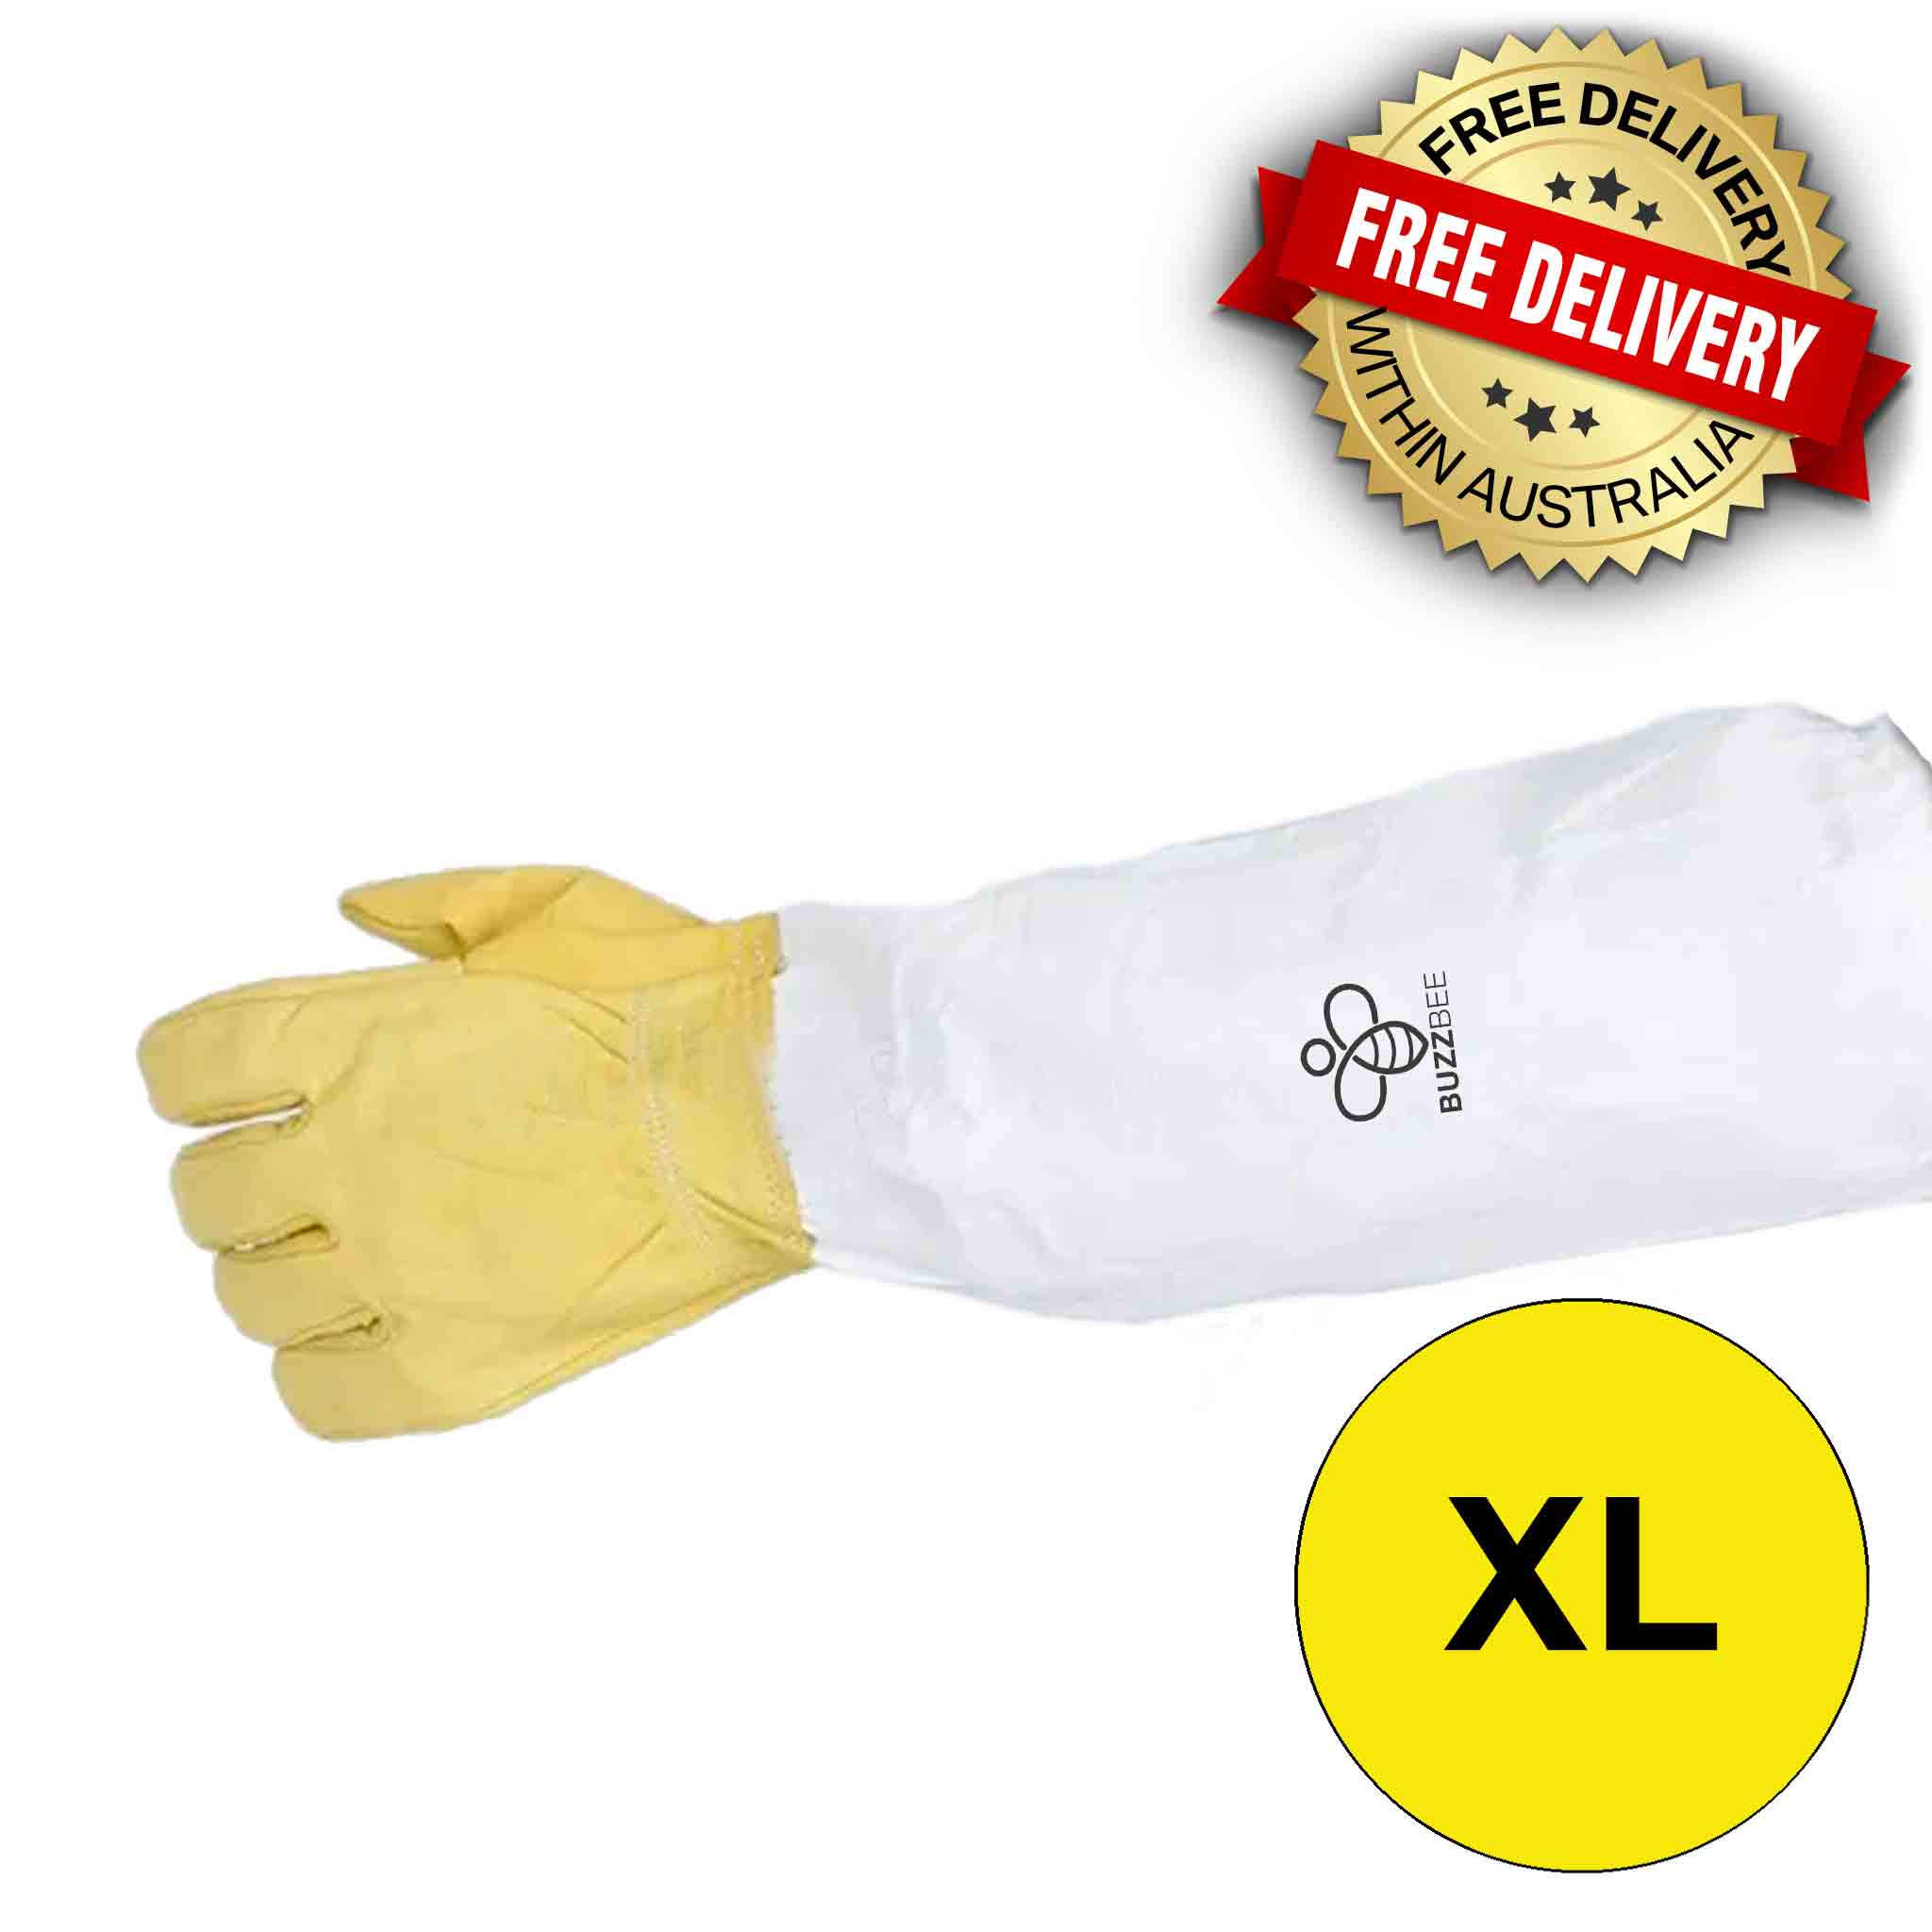 Buzzbee Beekeeping Gloves - Sheepskin - White - Clothing collection by Buzzbee Beekeeping Supplies